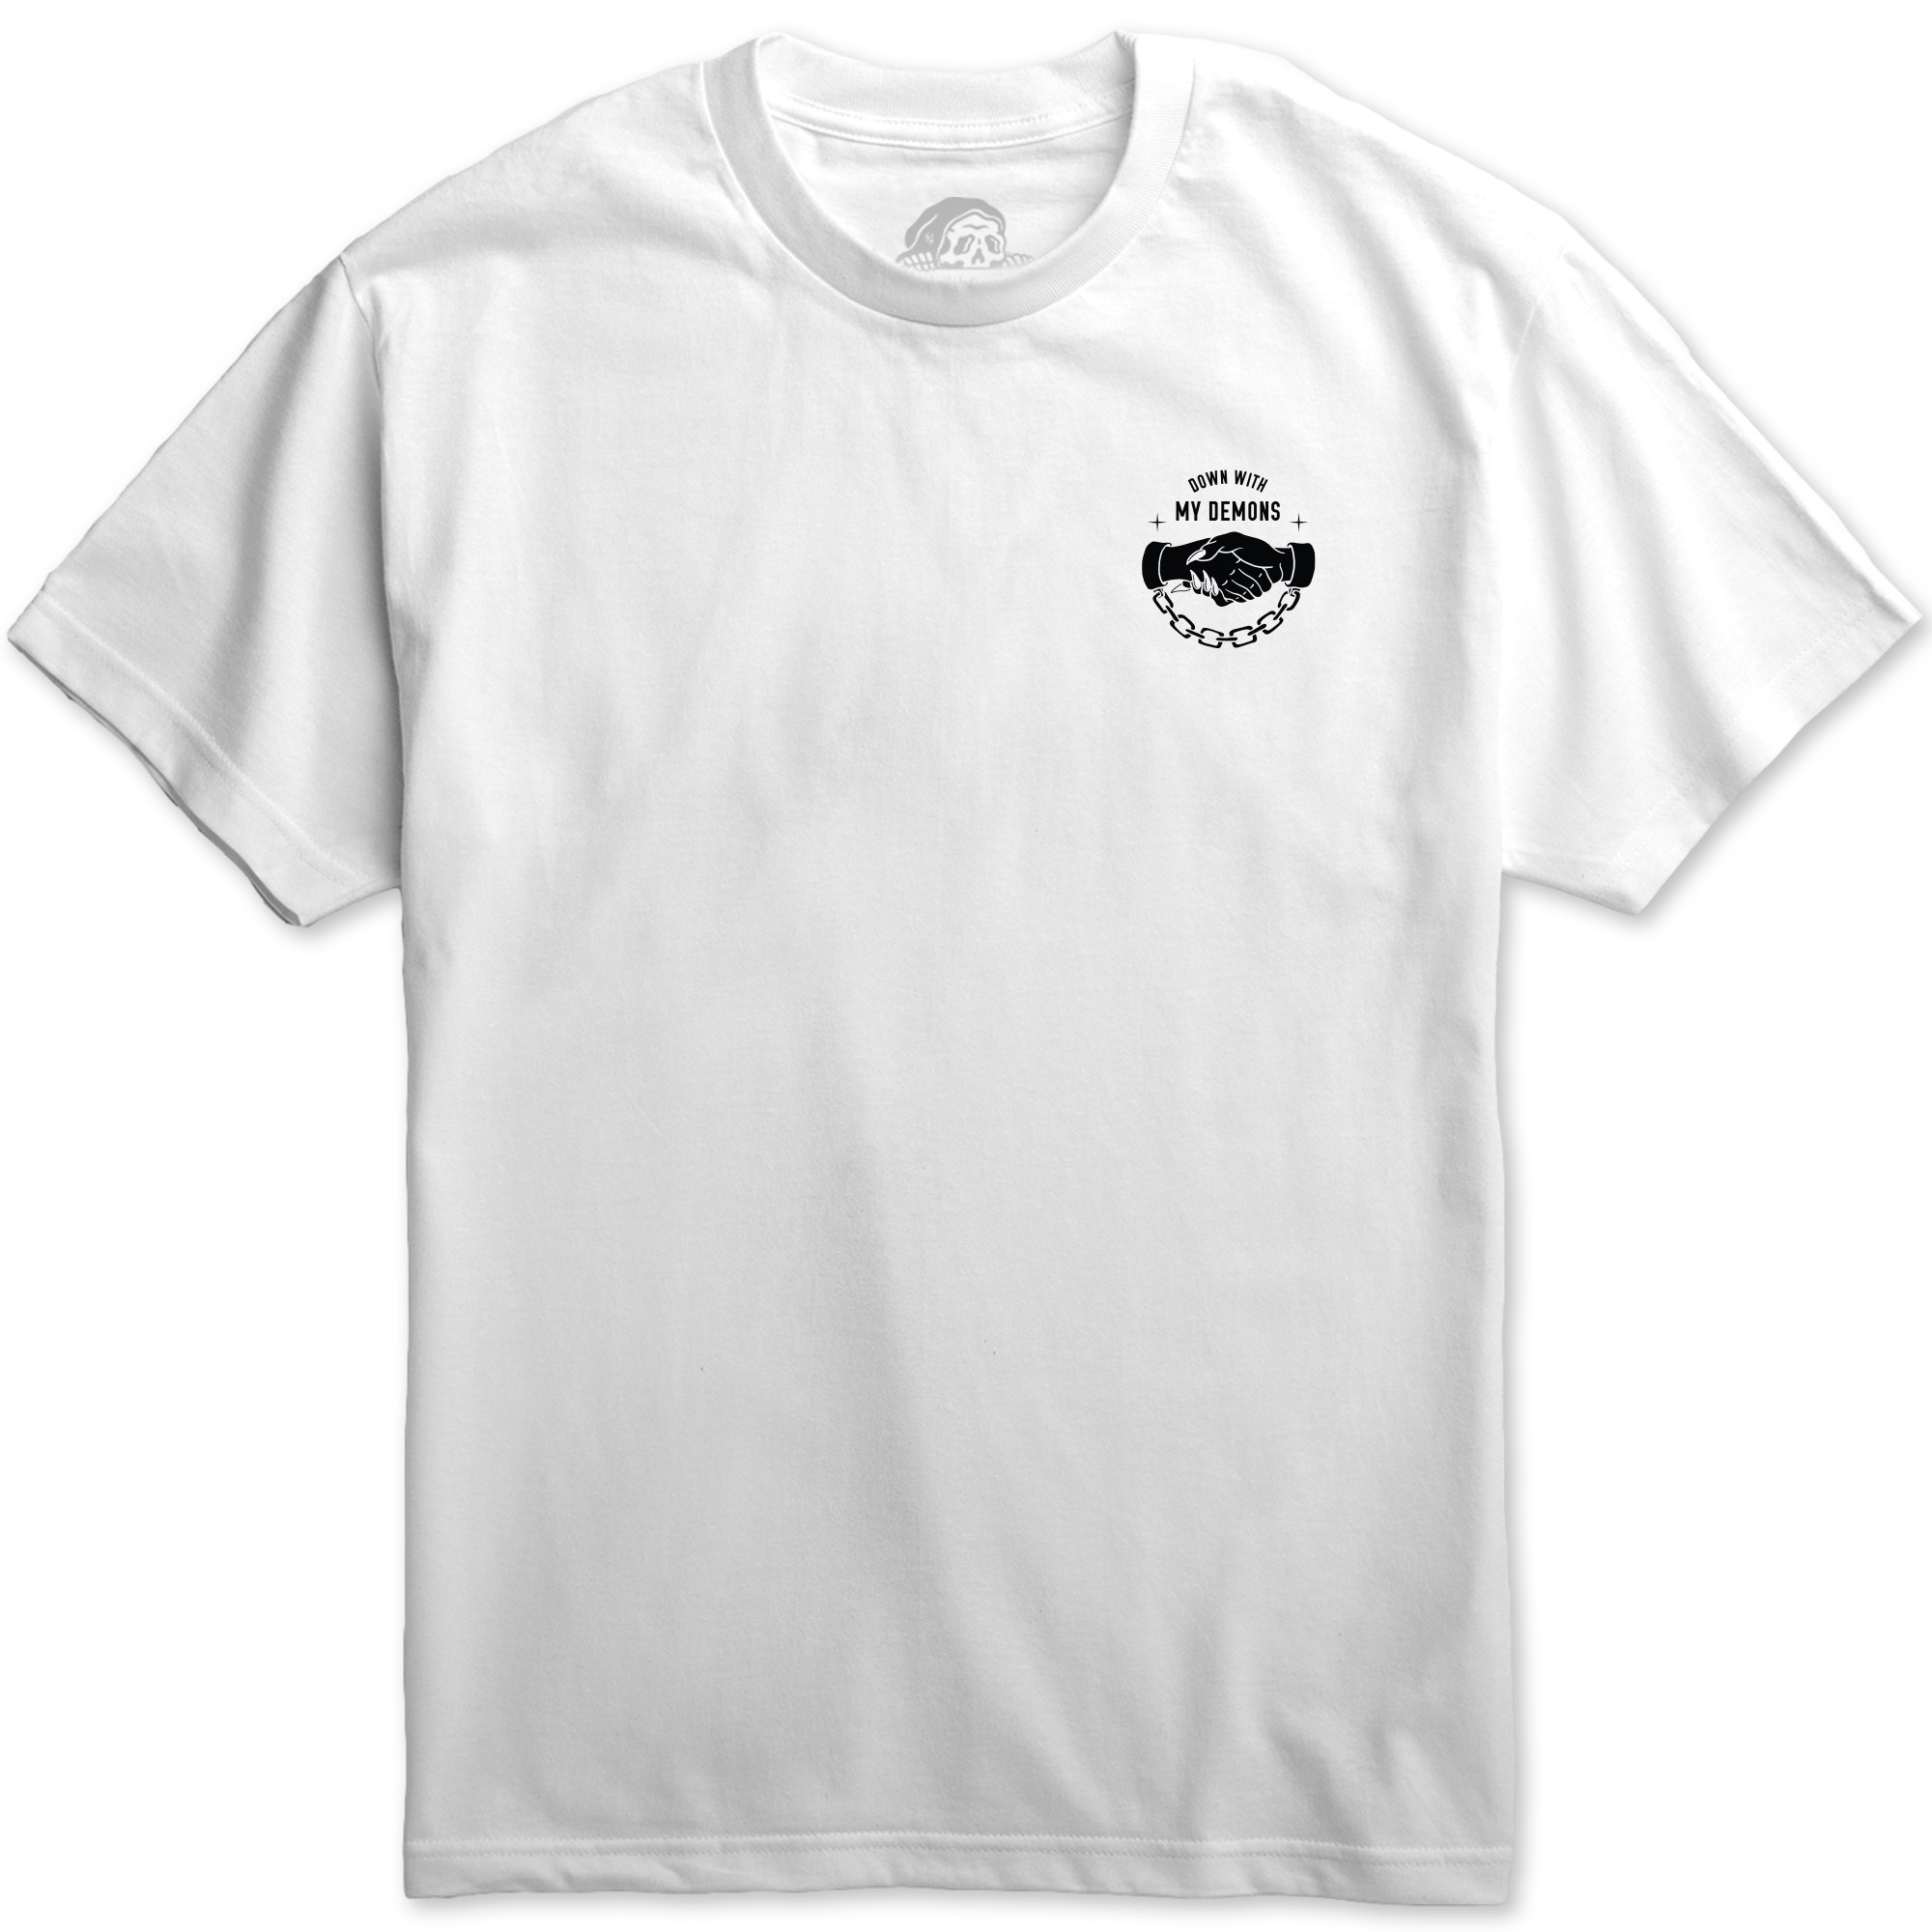 Down With My Demons Tee - White - Lurking Class